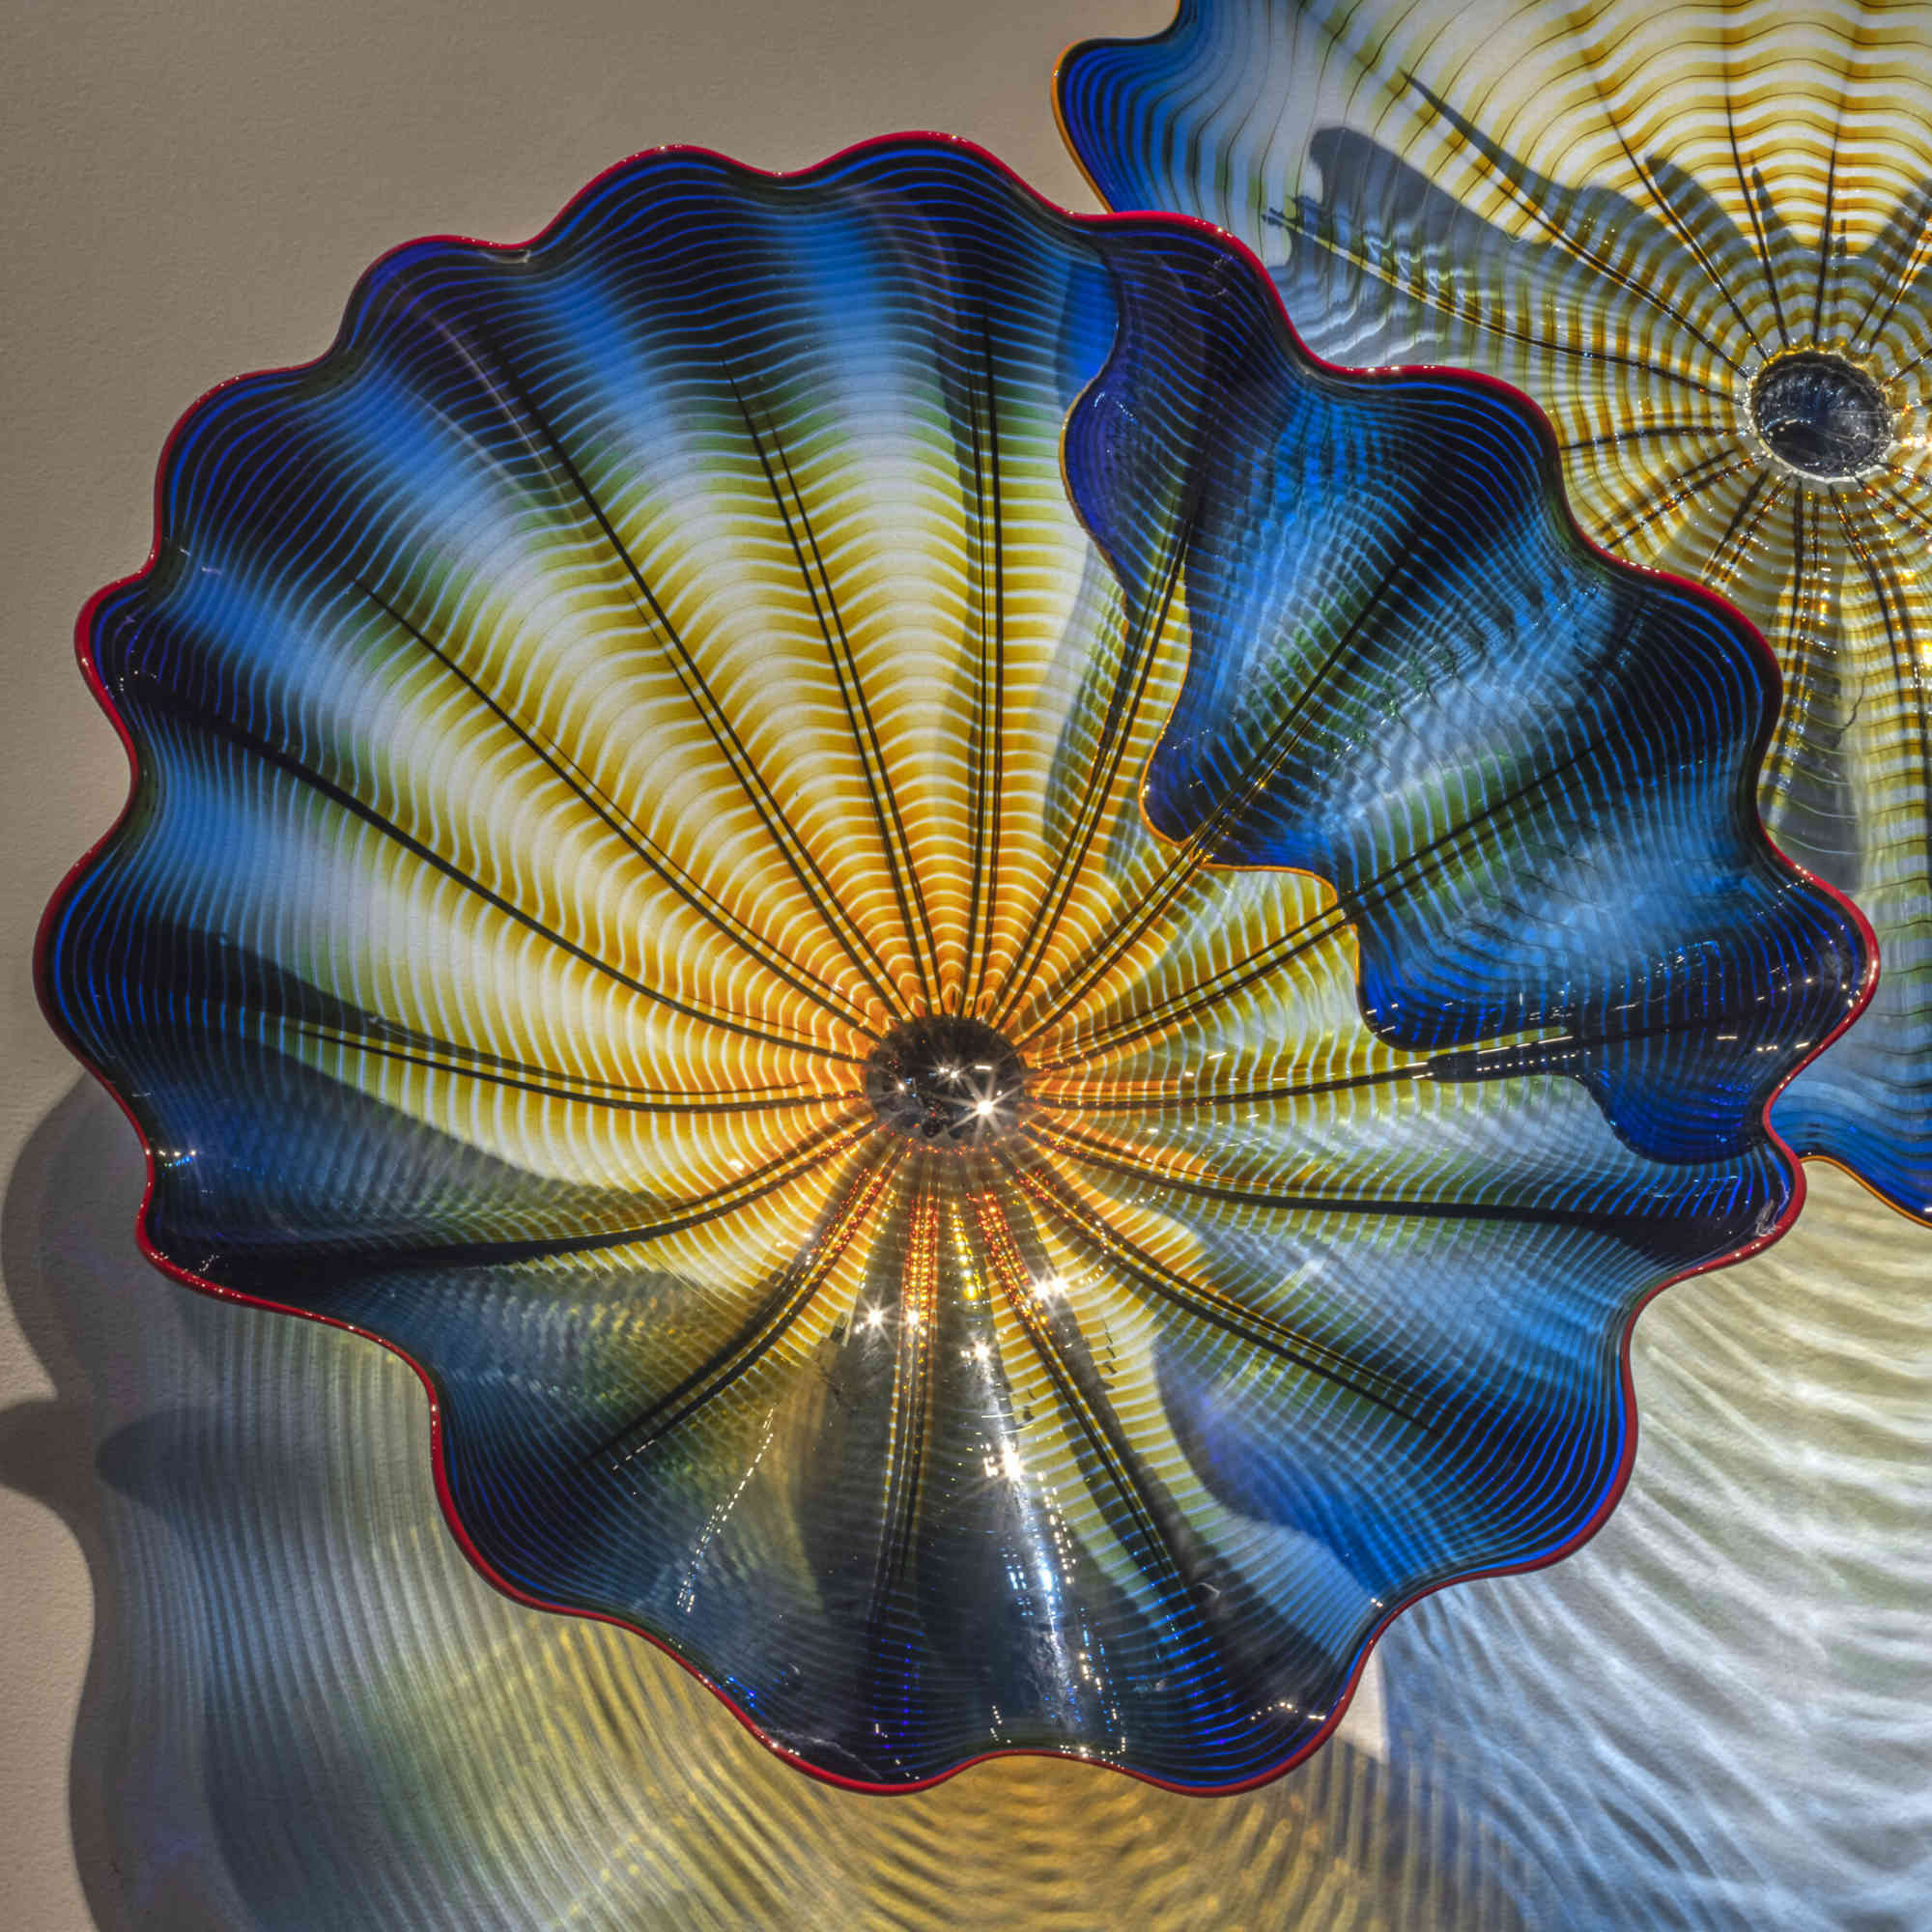 Dale Chihuly, Lupine Blue Persian Wall (detail)